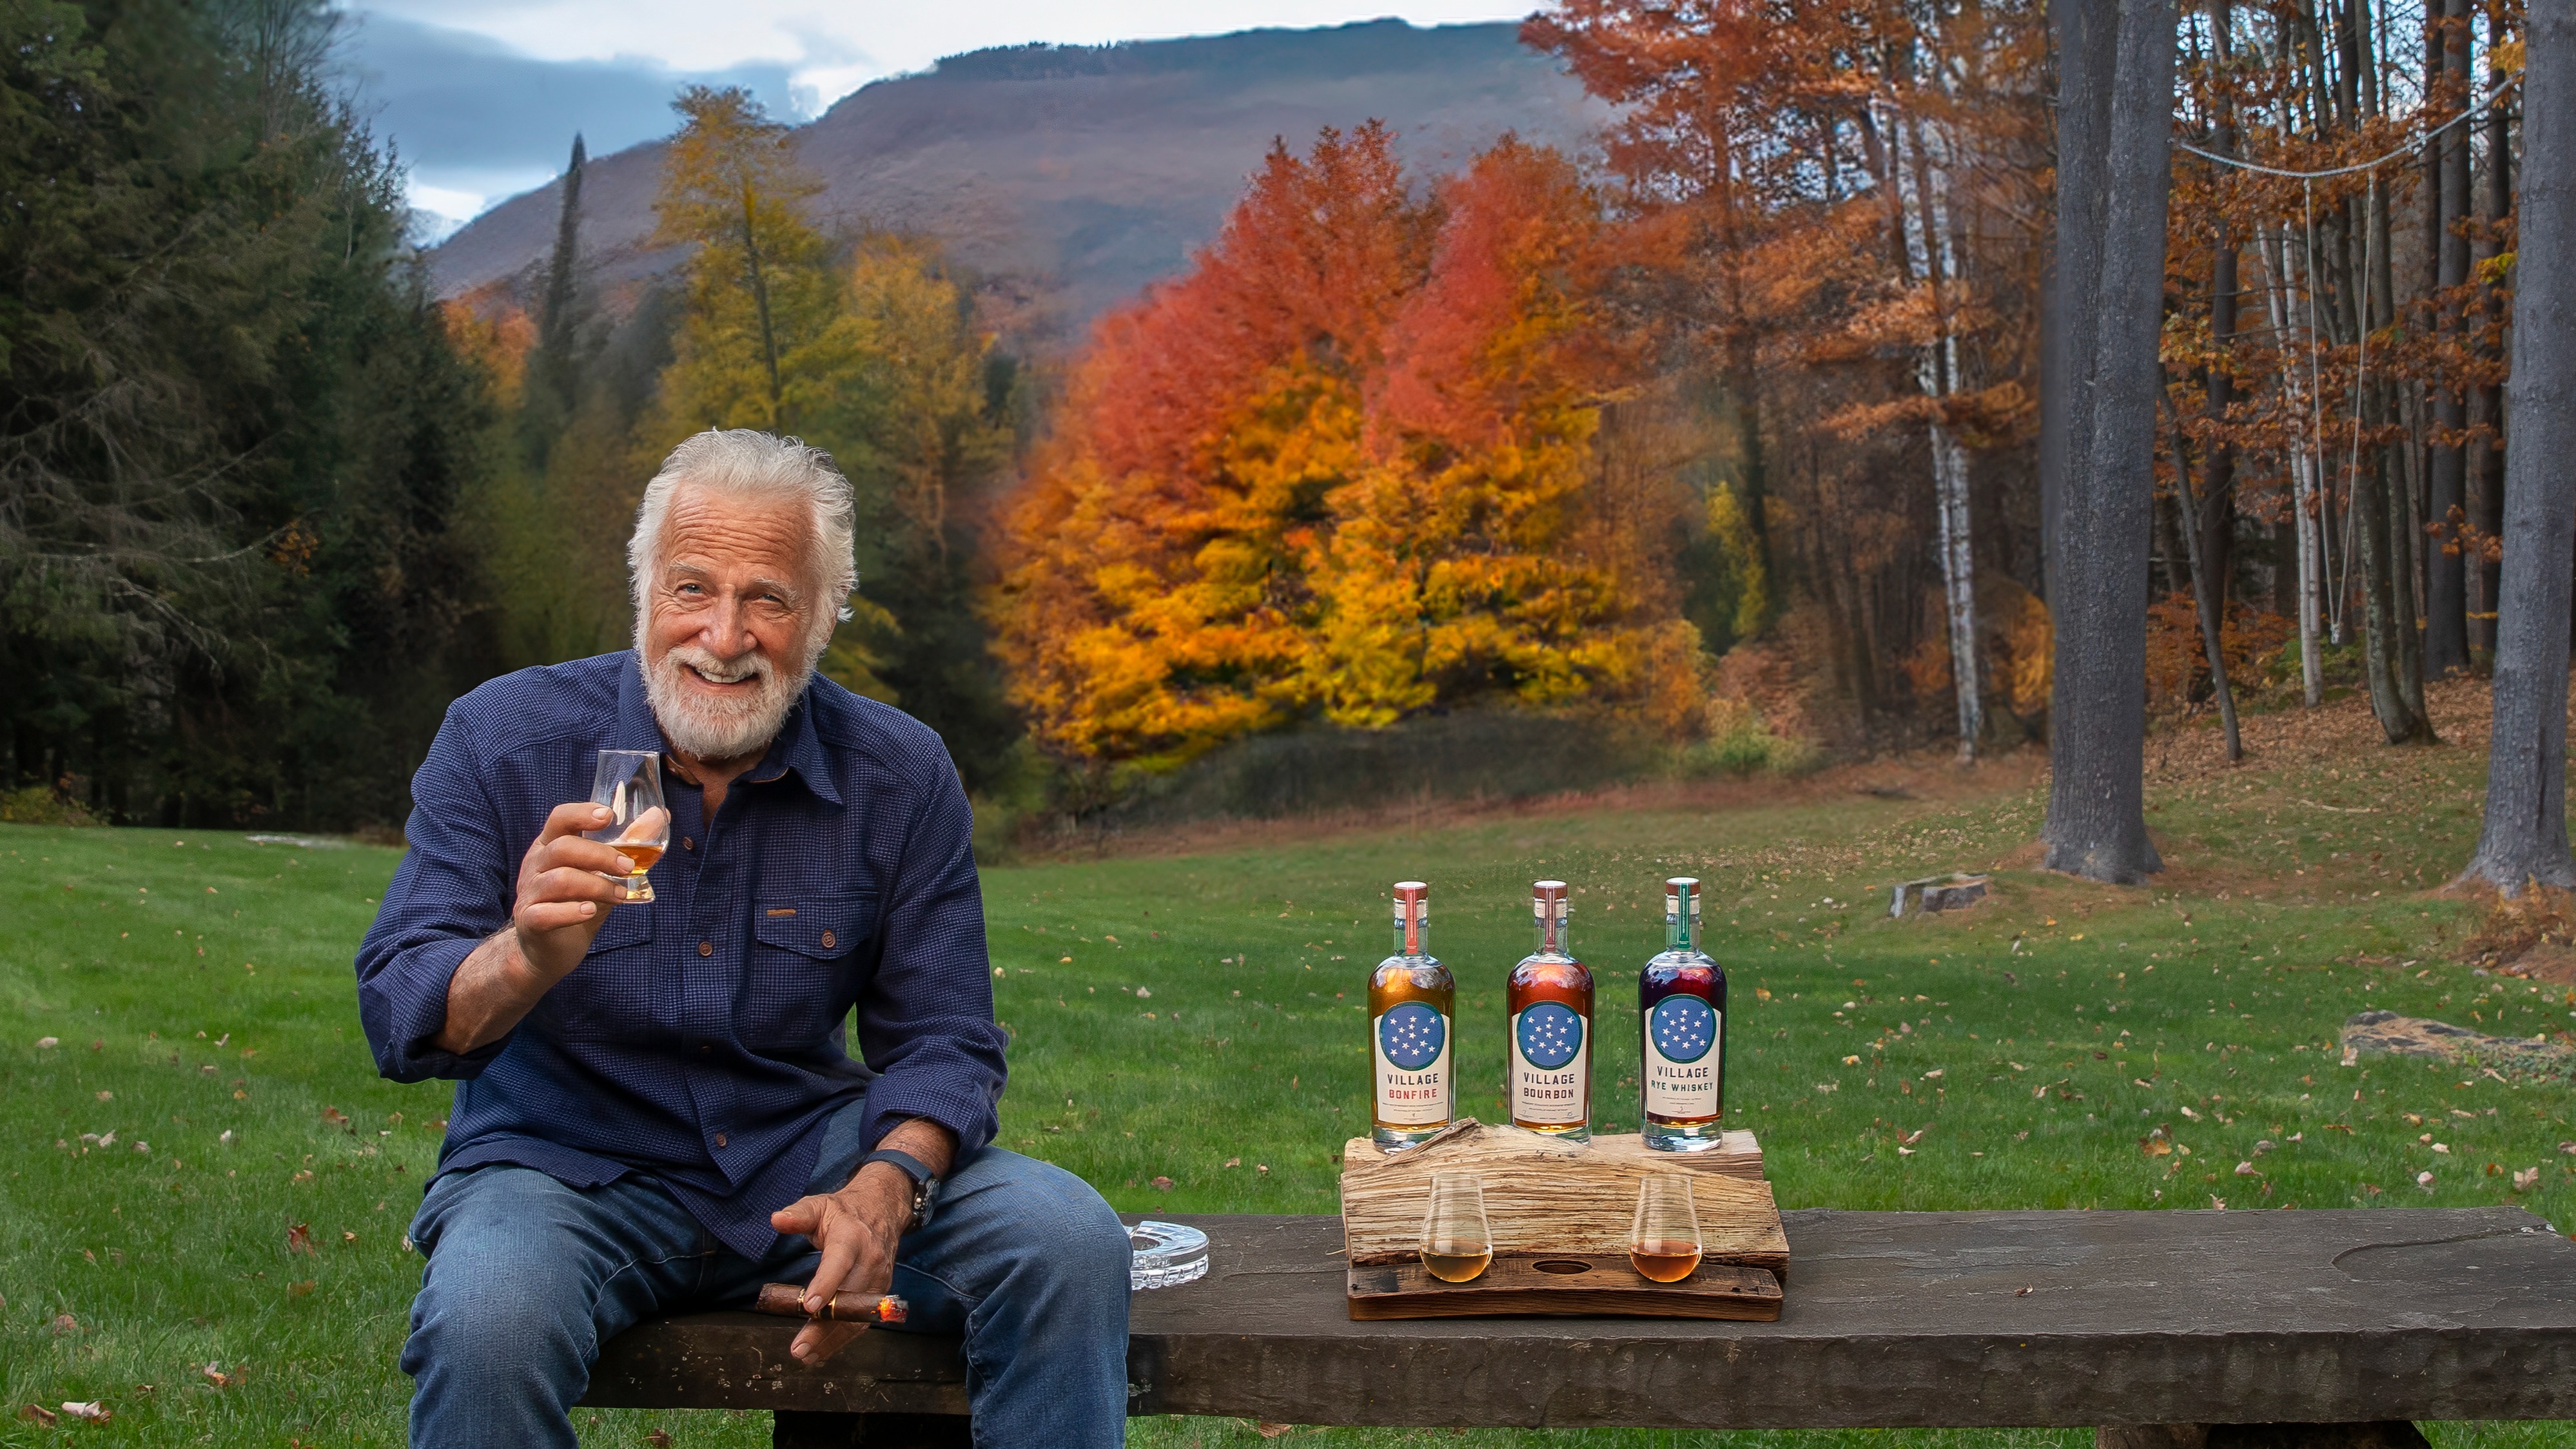 Jonathan Goldsmith, The Actor Who Portrayed the Most Interesting Man in the World, Joins Vermont's Village Garage Distillery as Chief Storytelling Officer